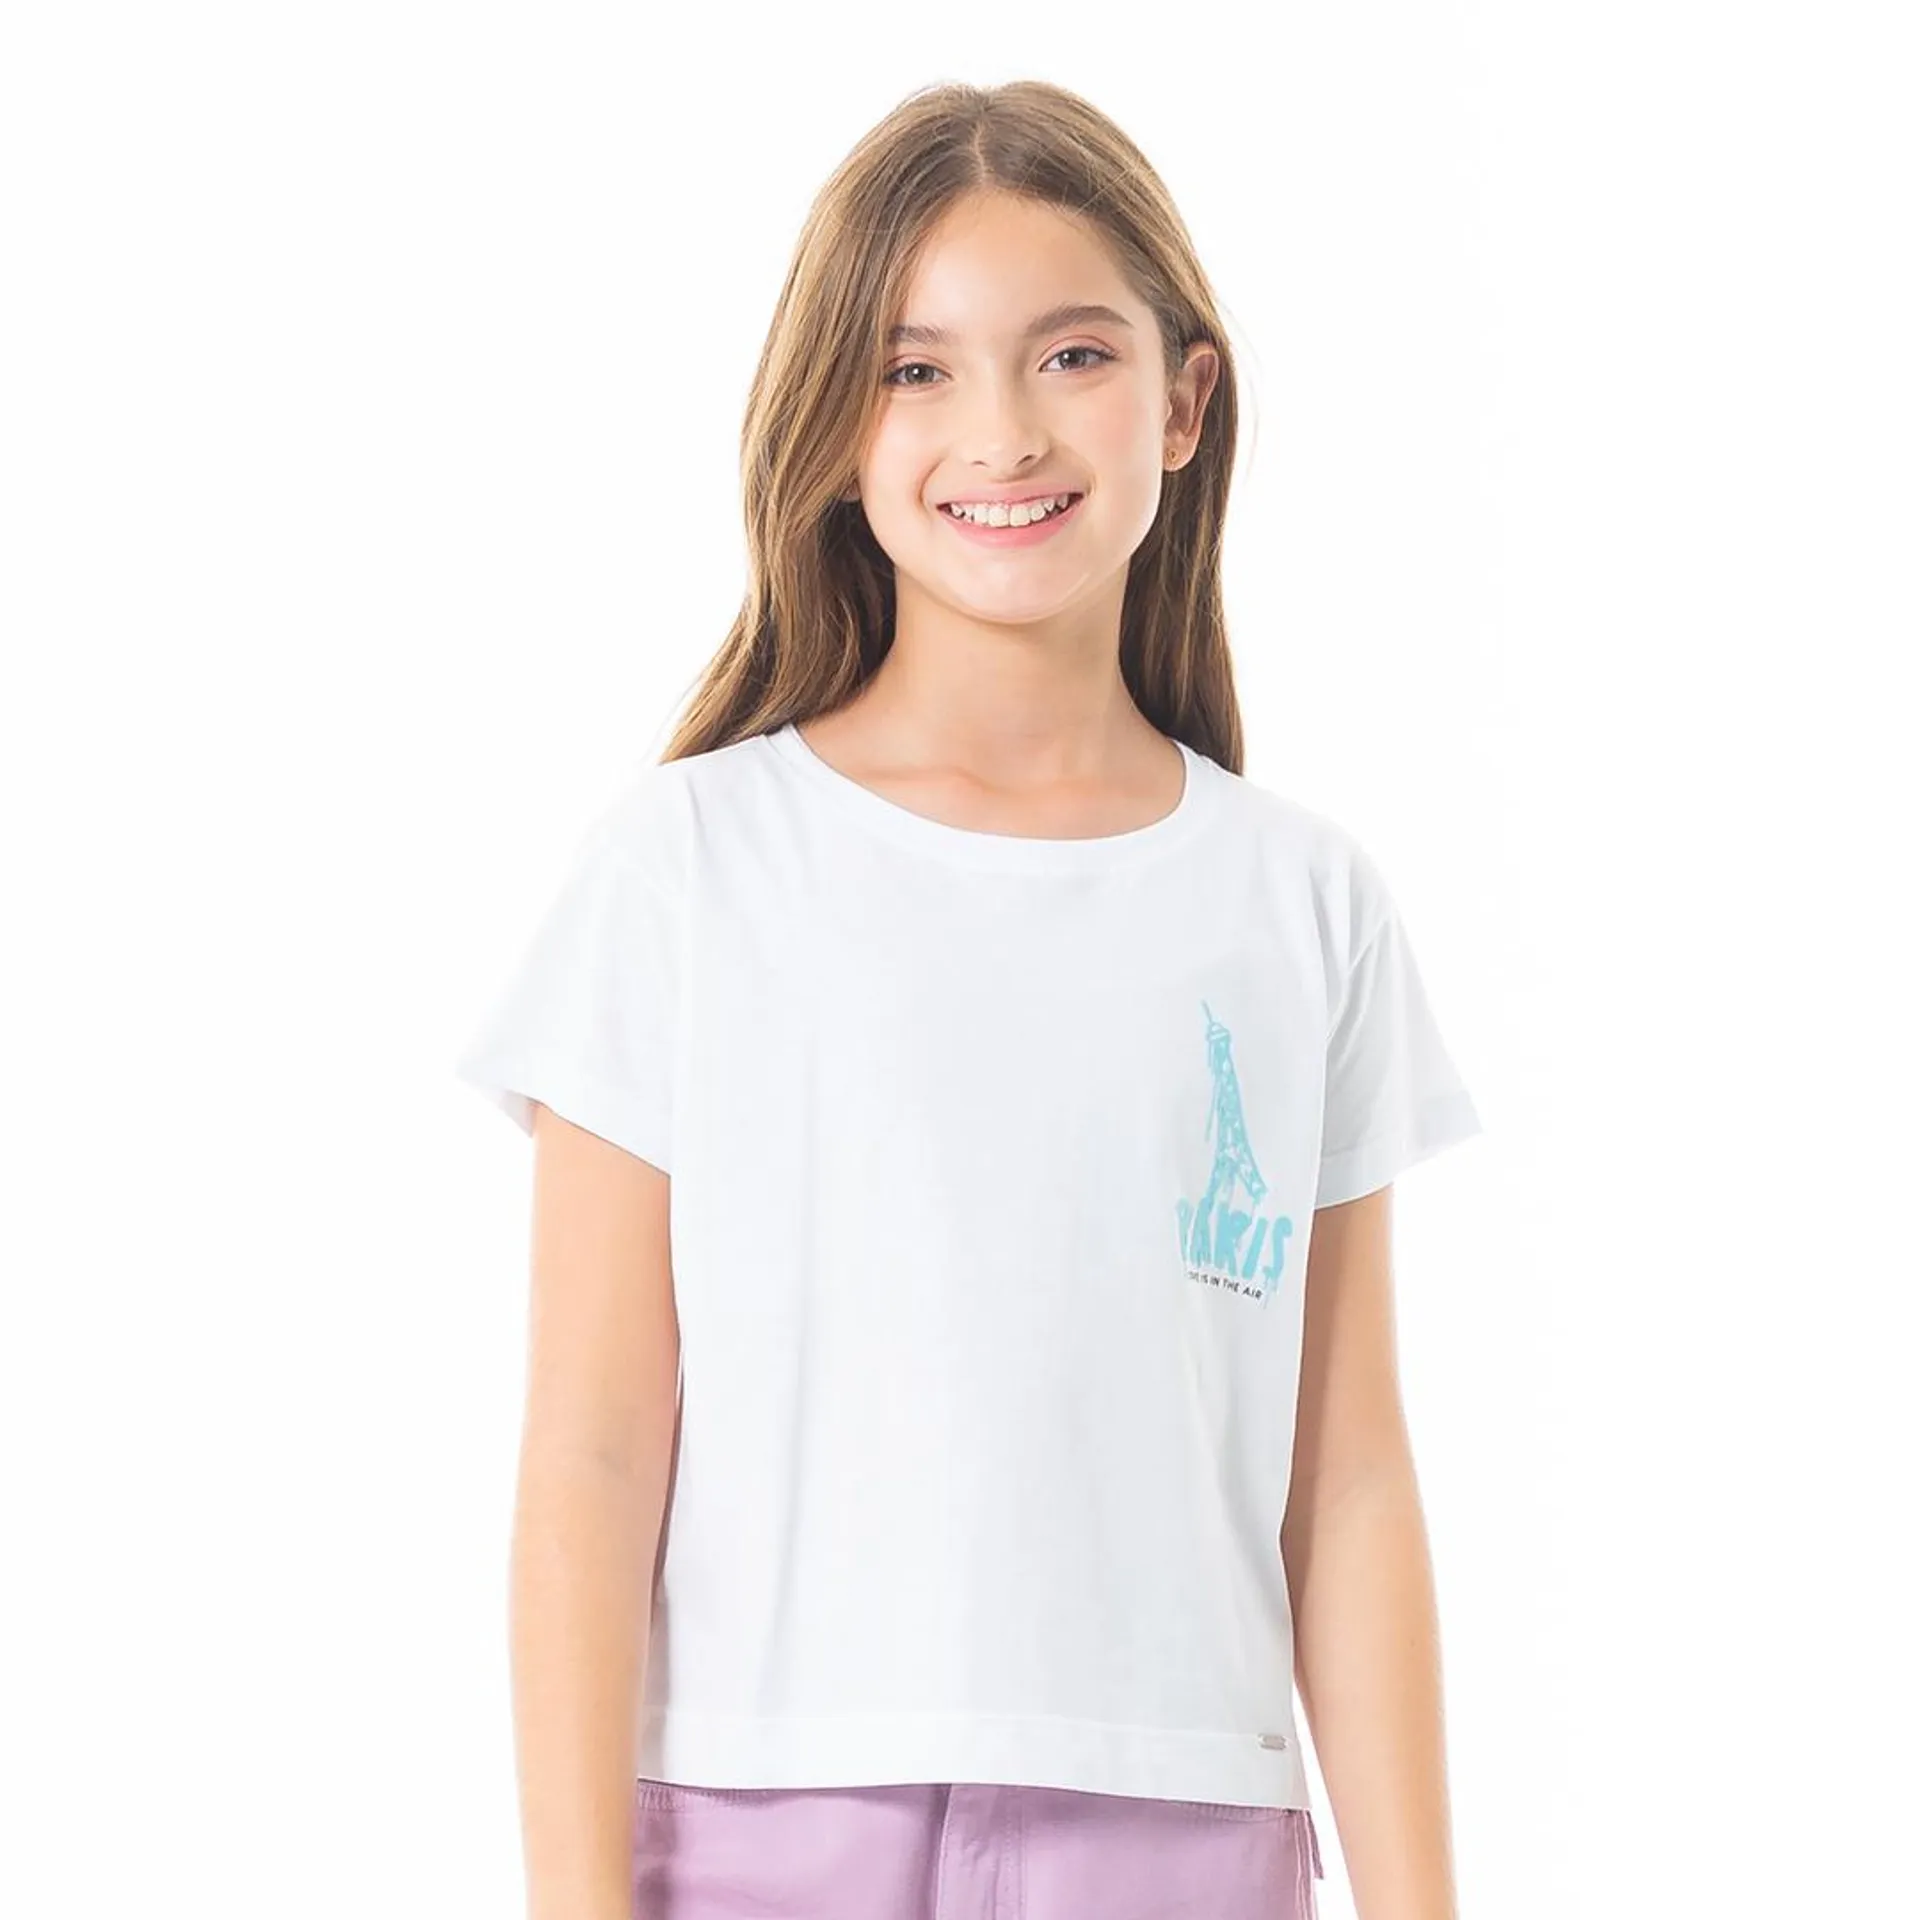 2 SIDES GRAPHIC T-SHIRT FOR GIRLS